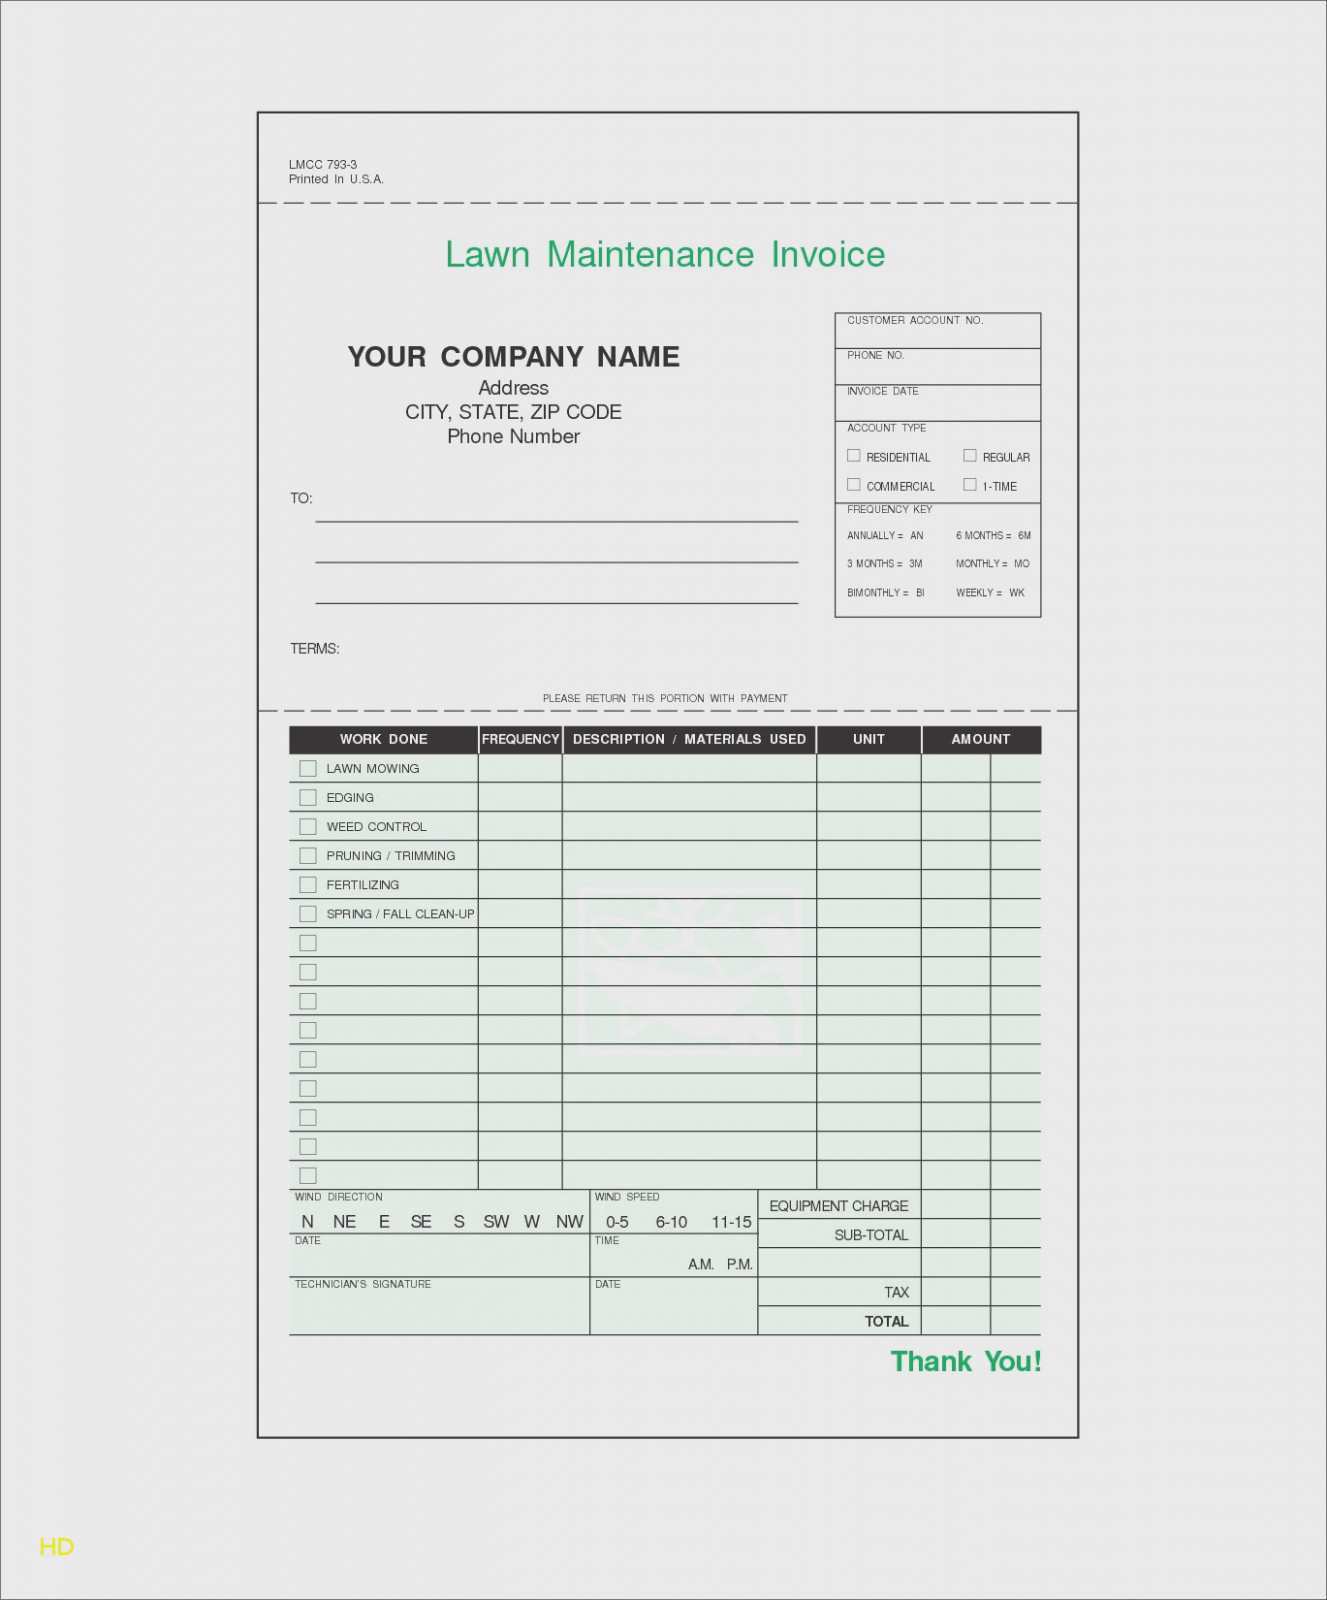 87 Visiting Landscaping Invoice Template Pdf For Free by Landscaping Invoice Template Pdf